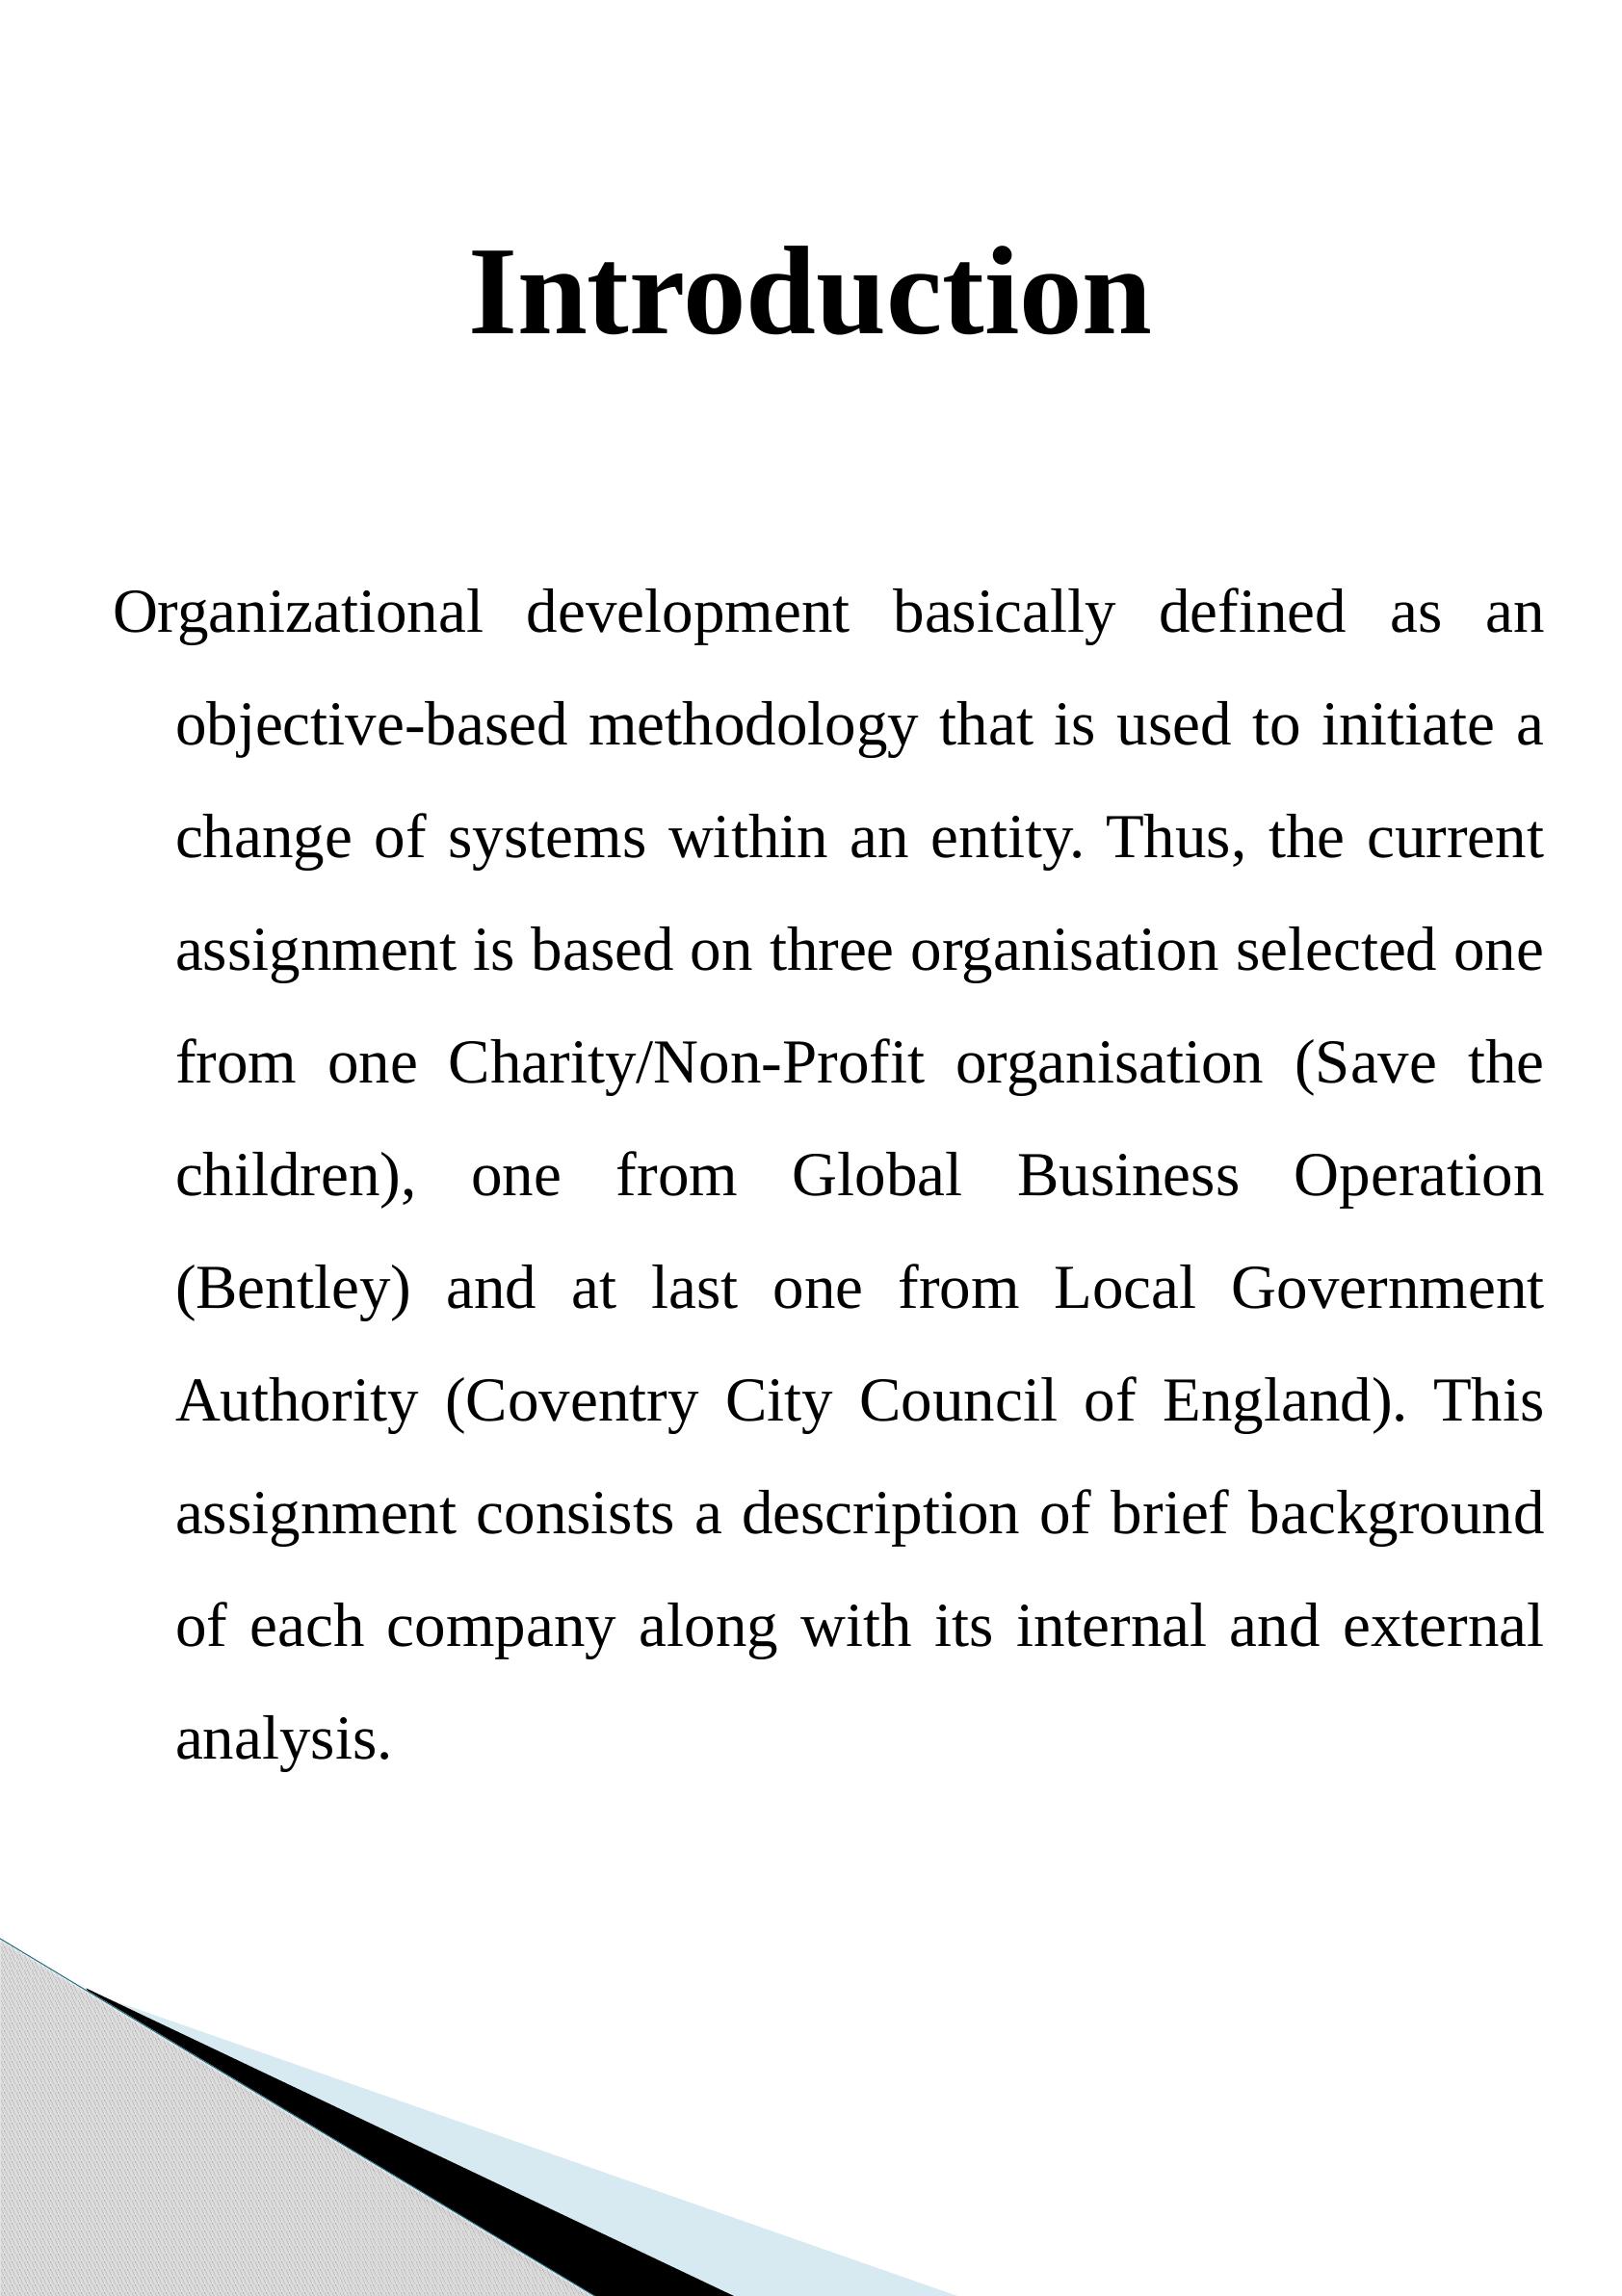 Organisational Development: Analysis of Save the Children, Bentley, and Coventry City Council_1